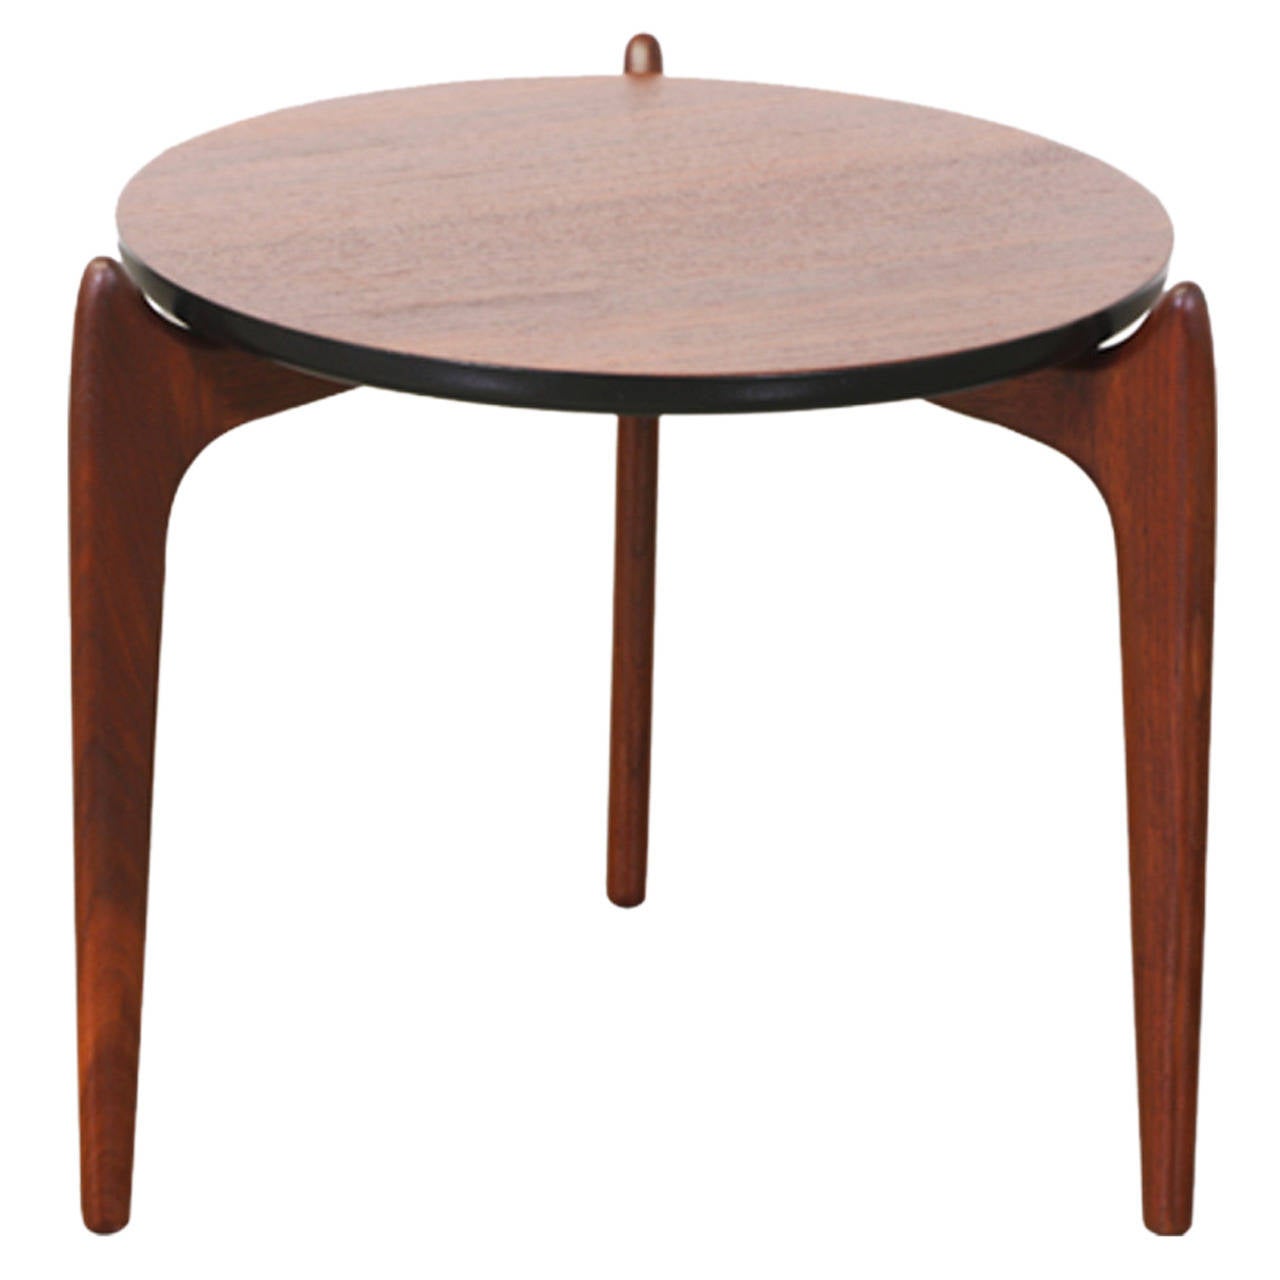 Mid-Century Modern Adrian Pearsall Sculpted Tri – Leg Side Table for Craft Associates